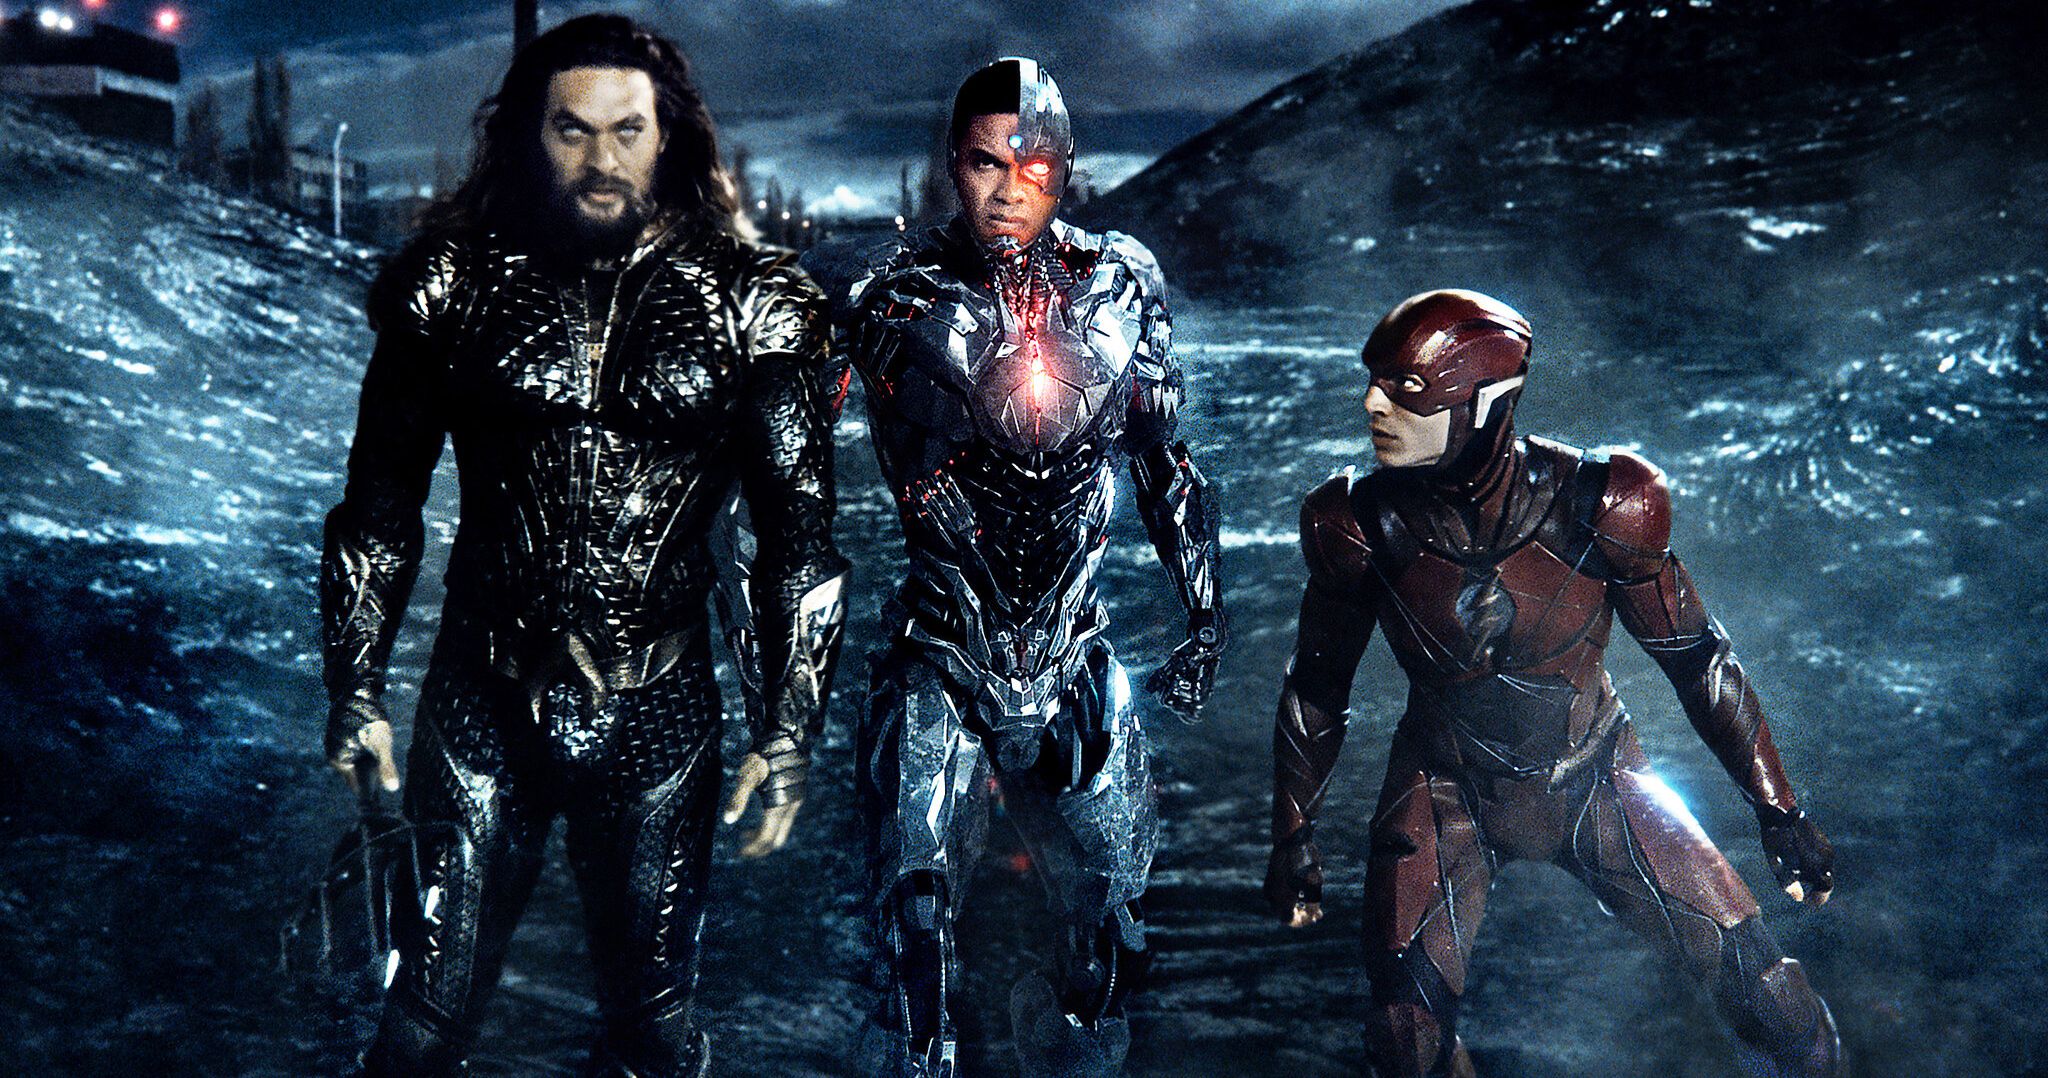 Why Now Is the Right Time to Release Zack Snyder's Justice League According to Producer